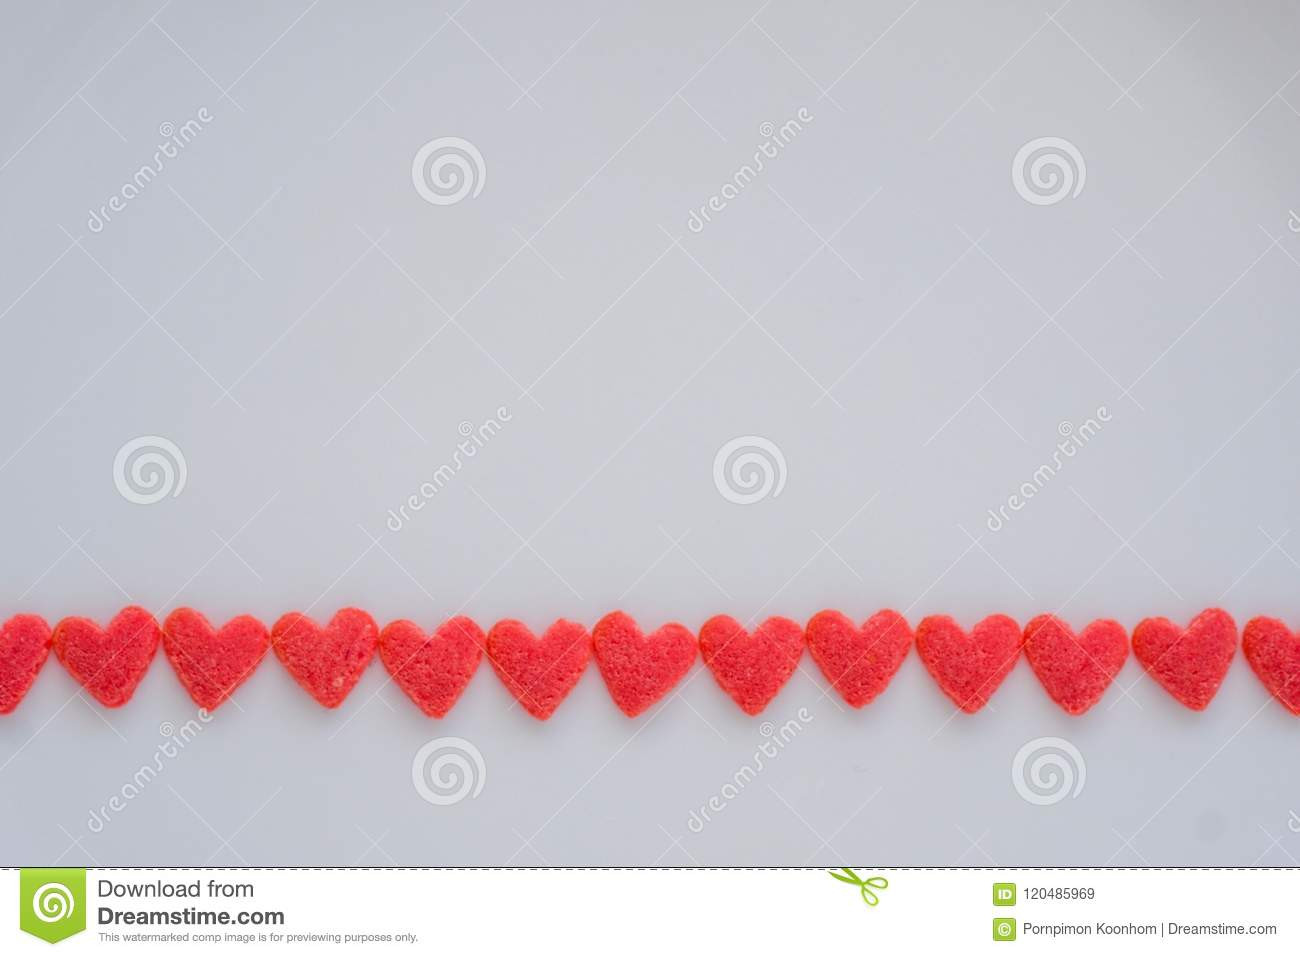 18 Lovable Small Heart Shaped Vase 2024 free download small heart shaped vase of row od mini red heart candy on white background stock image image with download row od mini red heart candy on white background stock image image of love